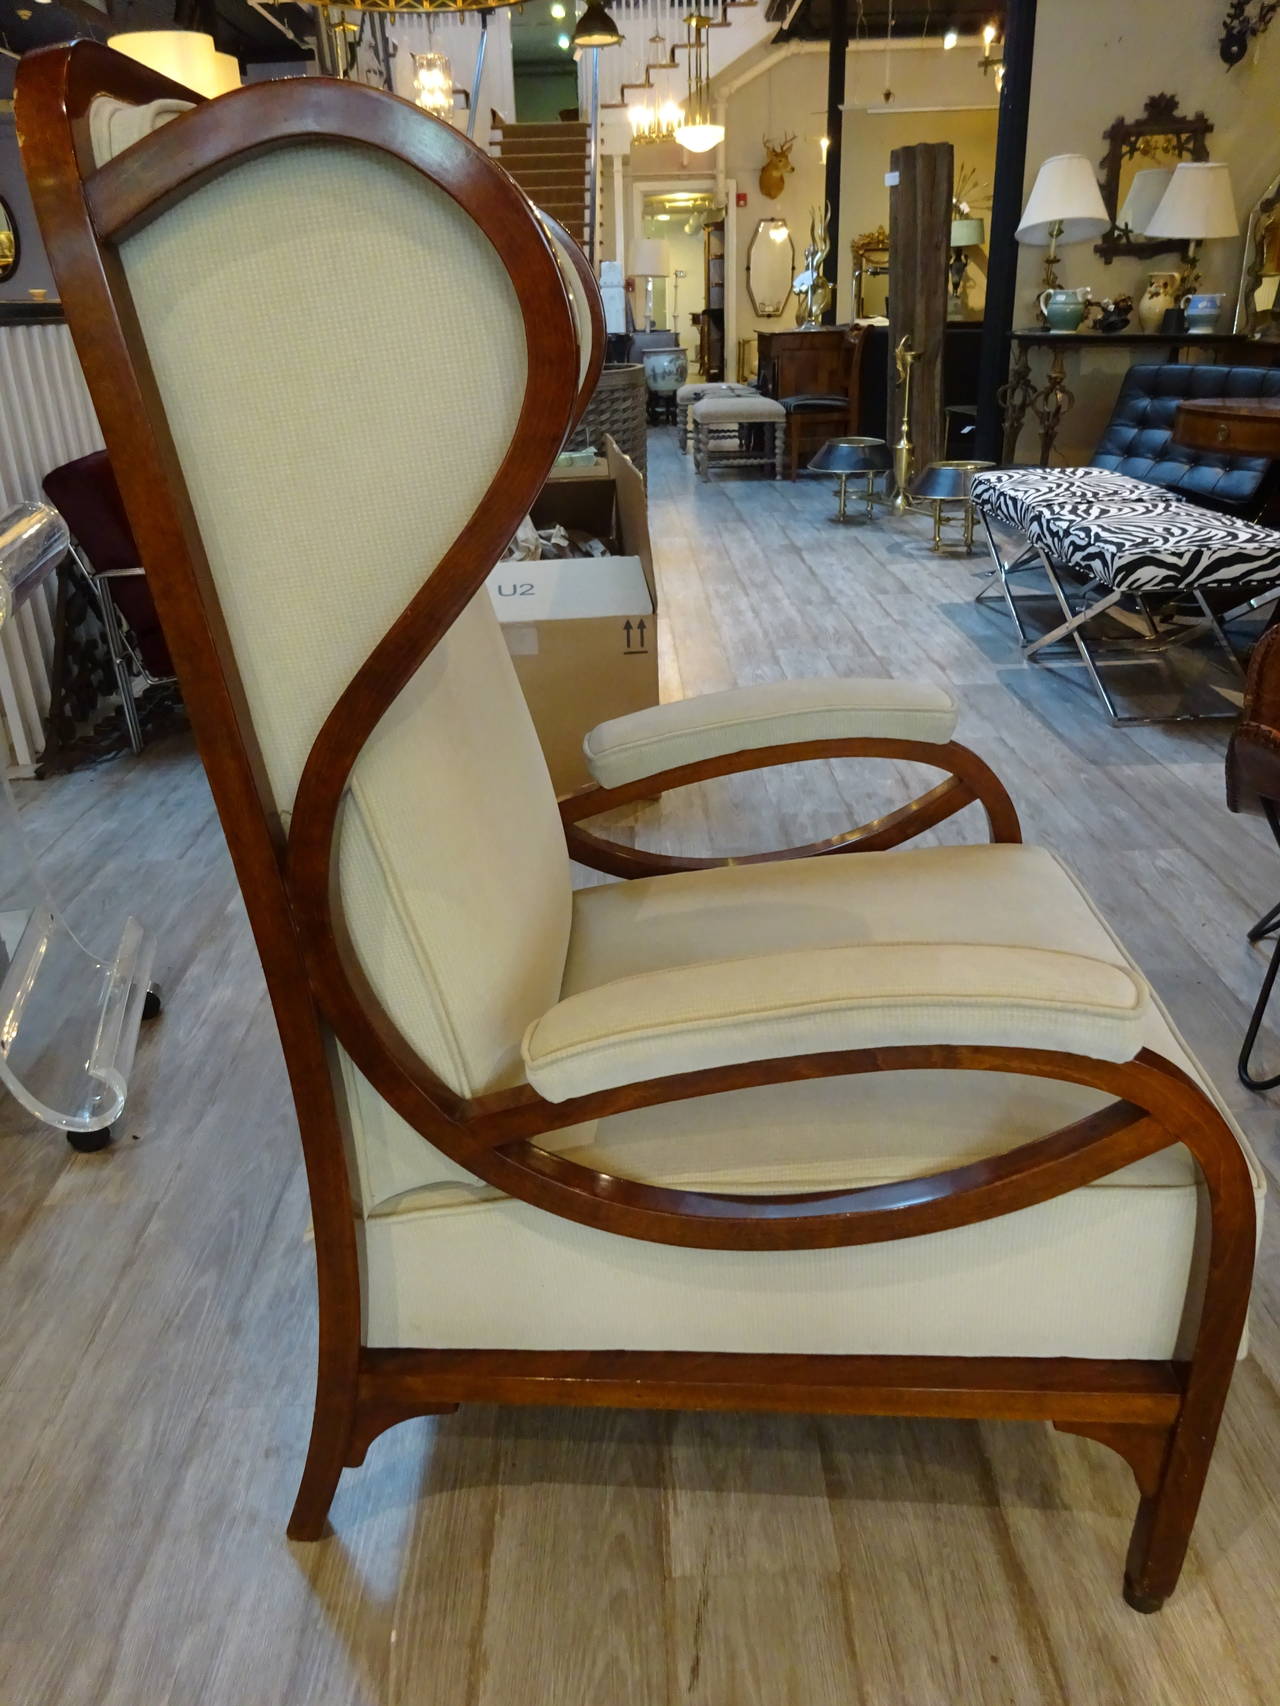 Fauteuil No. 6542, Thonet
Design by 1904, execution Fa.Thonet, Vienna, 
Viennese Wing Chair, Stained Beechwood, with recent neutral upholstery. A fine text book example of Art Nouveau furniture, beginning the transition to the Bauhaus